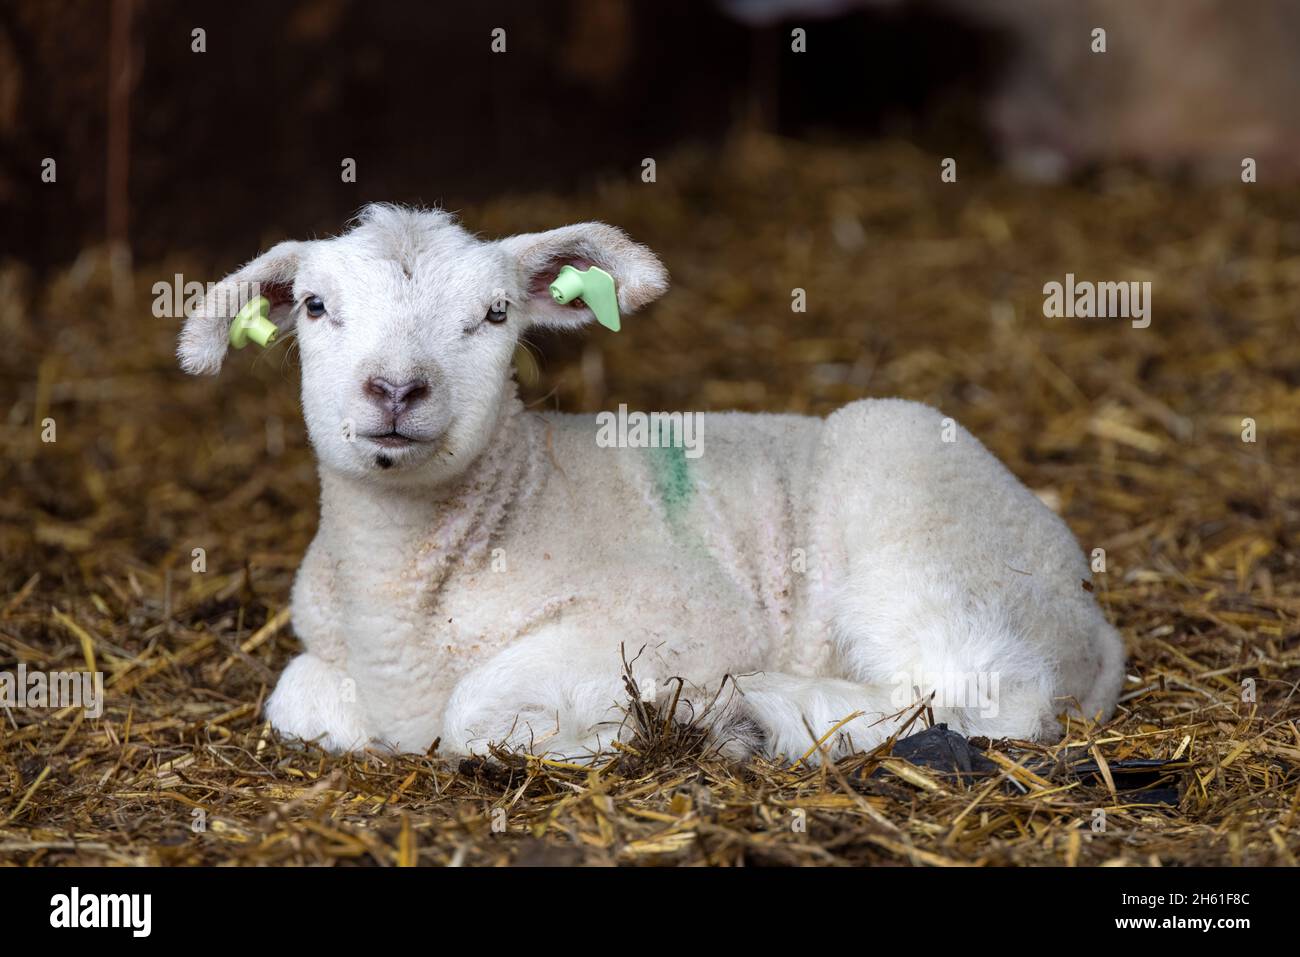 ILittle adorable lamb, looking friendly,  laying on straw in a barn, with green paint stain on its back, yellow ear tag Stock Photo